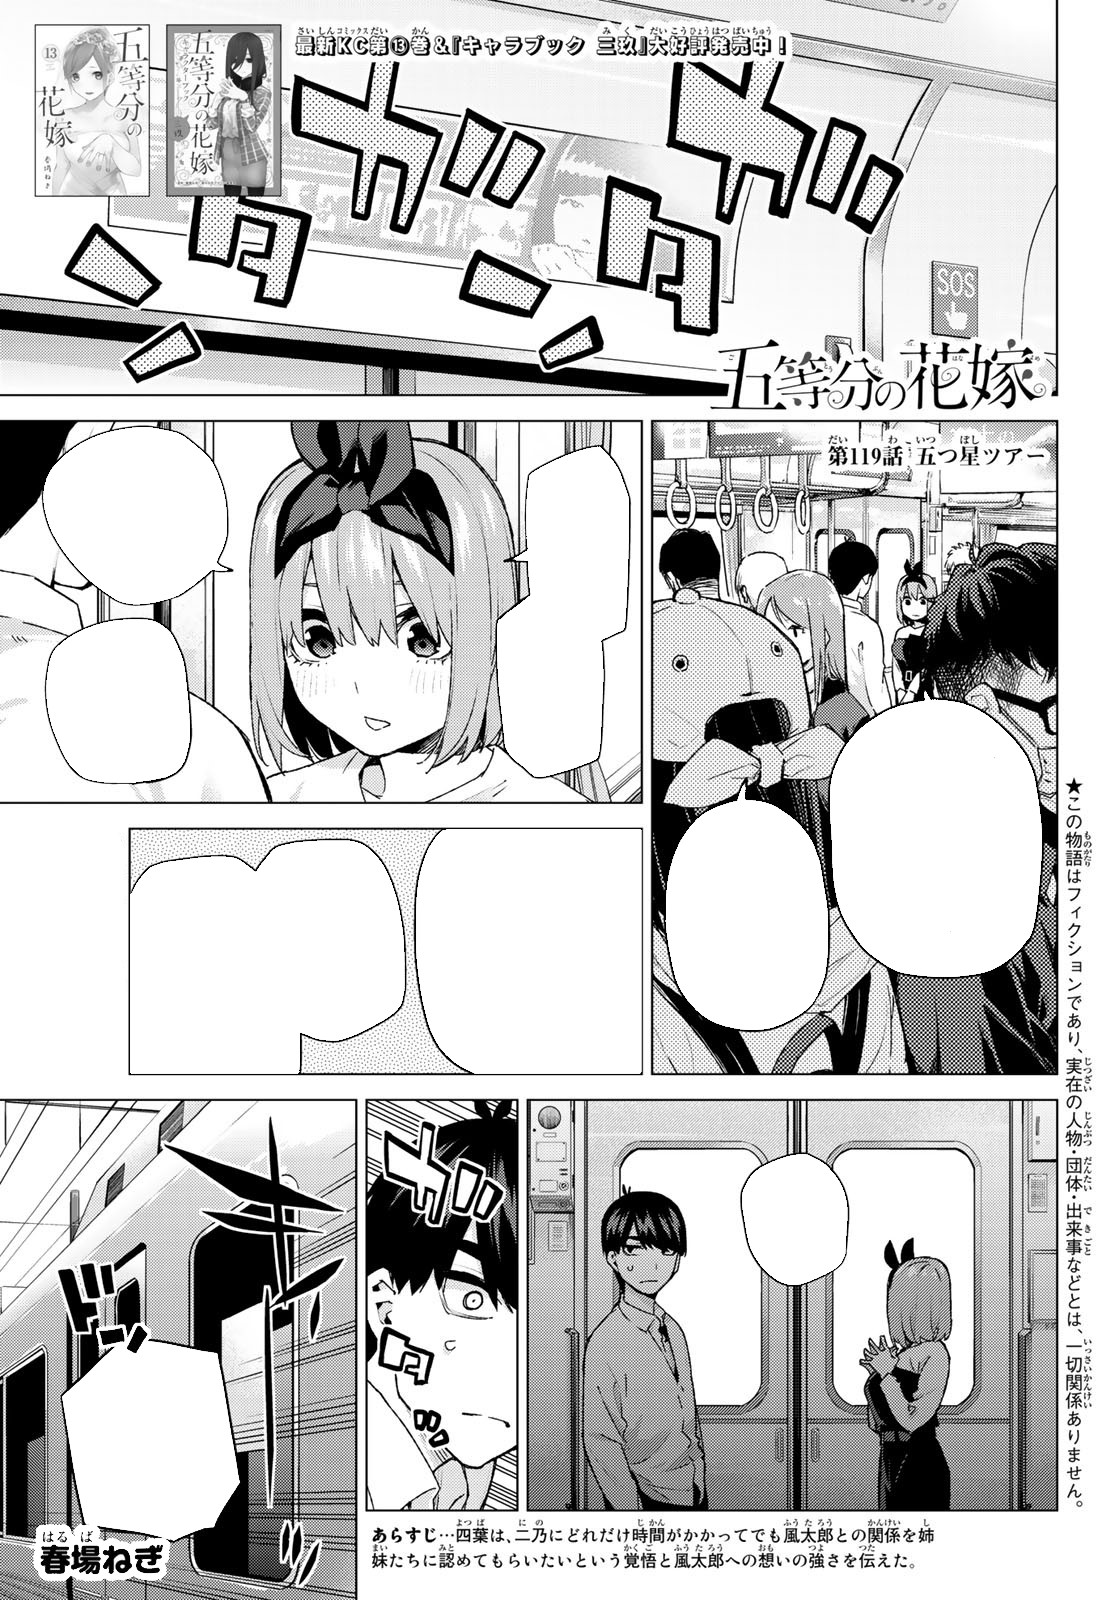 The Quintessential Quintuplets, Chapter 75 - English Scans